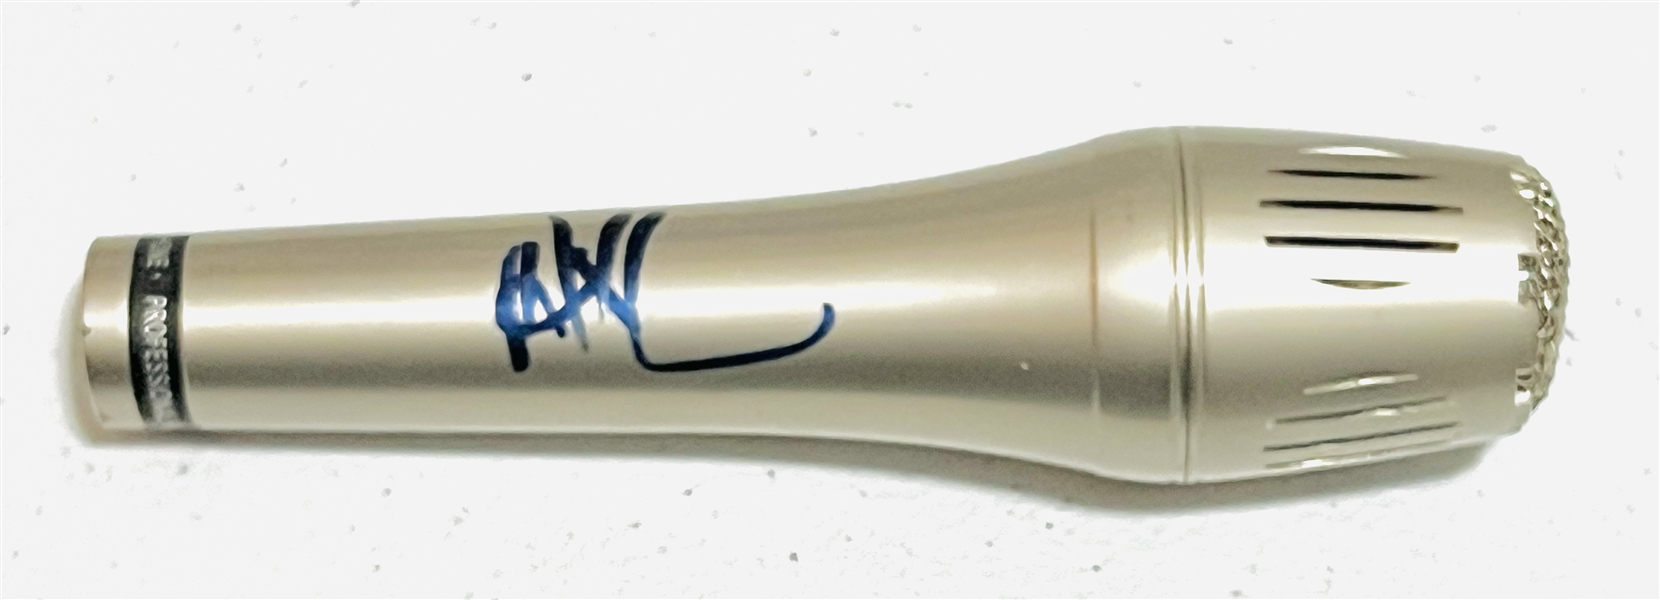 Guns N’ Roses: Axl Rose In-Person Signed Microphone (John Brennan Collection) (JSA Authentication)